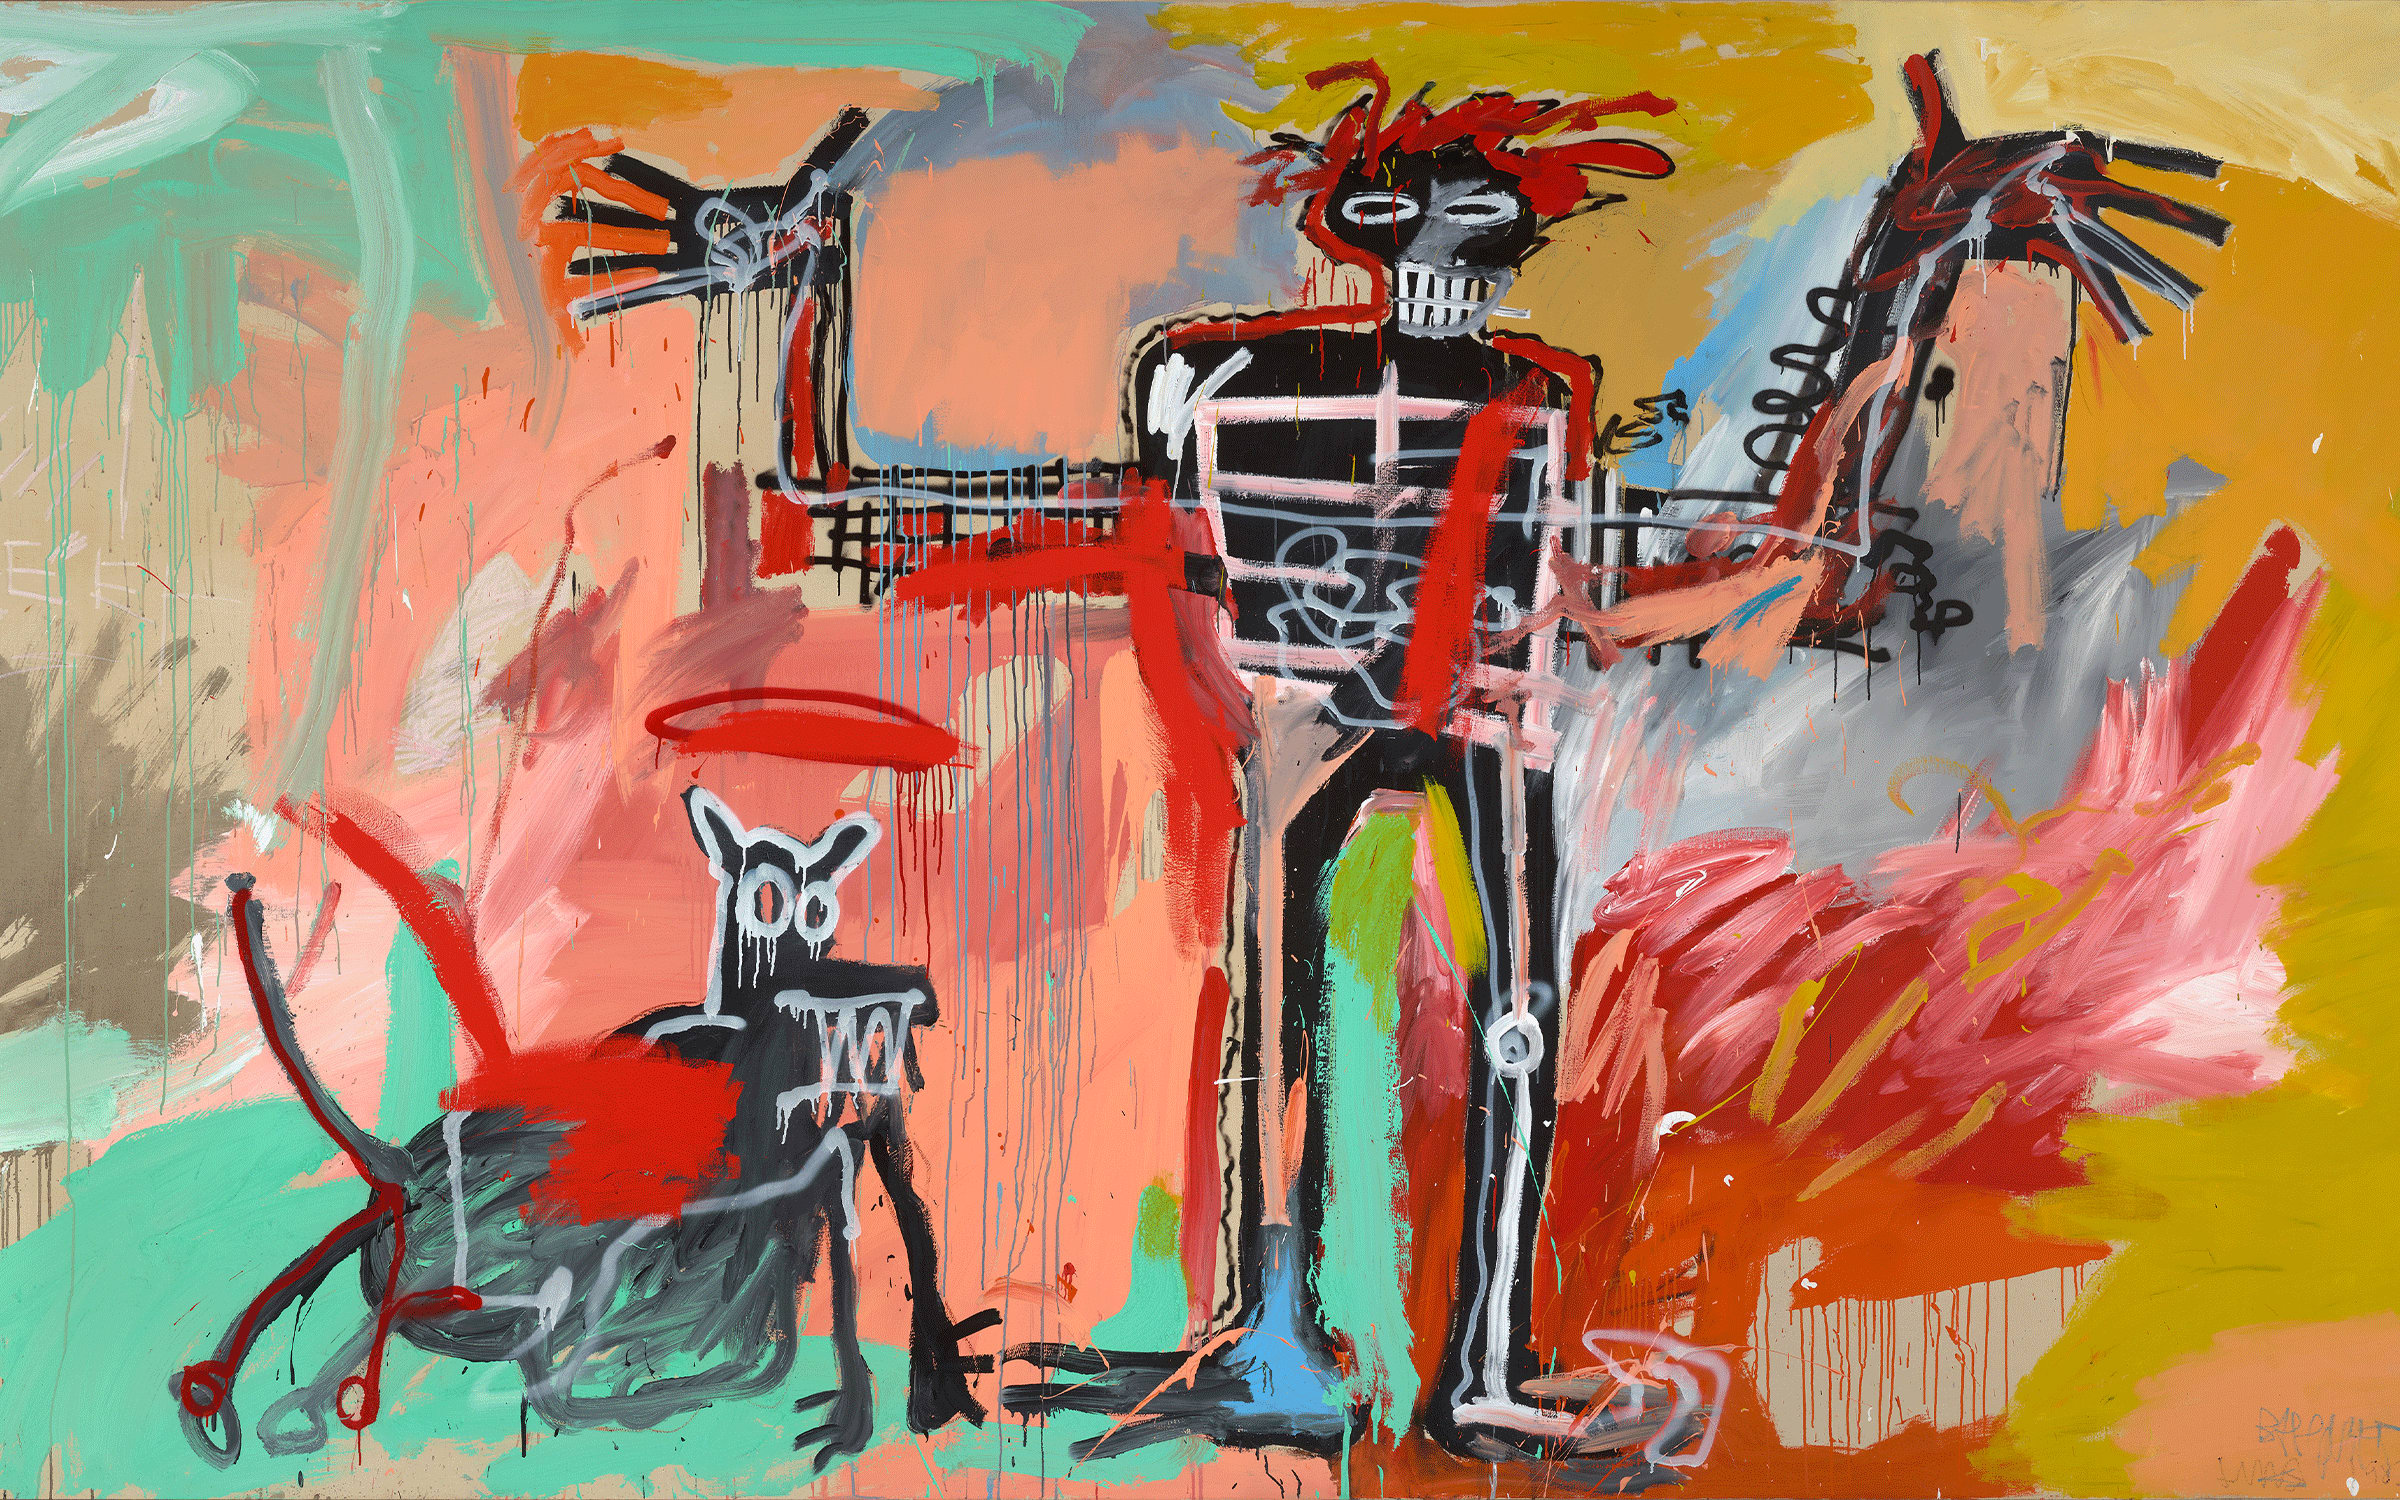 Jean-Michel Basquiat, Boy and Dog in a Johnnypump, 1982. Private Collection © Estate of Jean-Michel Basquiat. Licensed by Artestar, New York. Photograph by Daniel Portnoy.